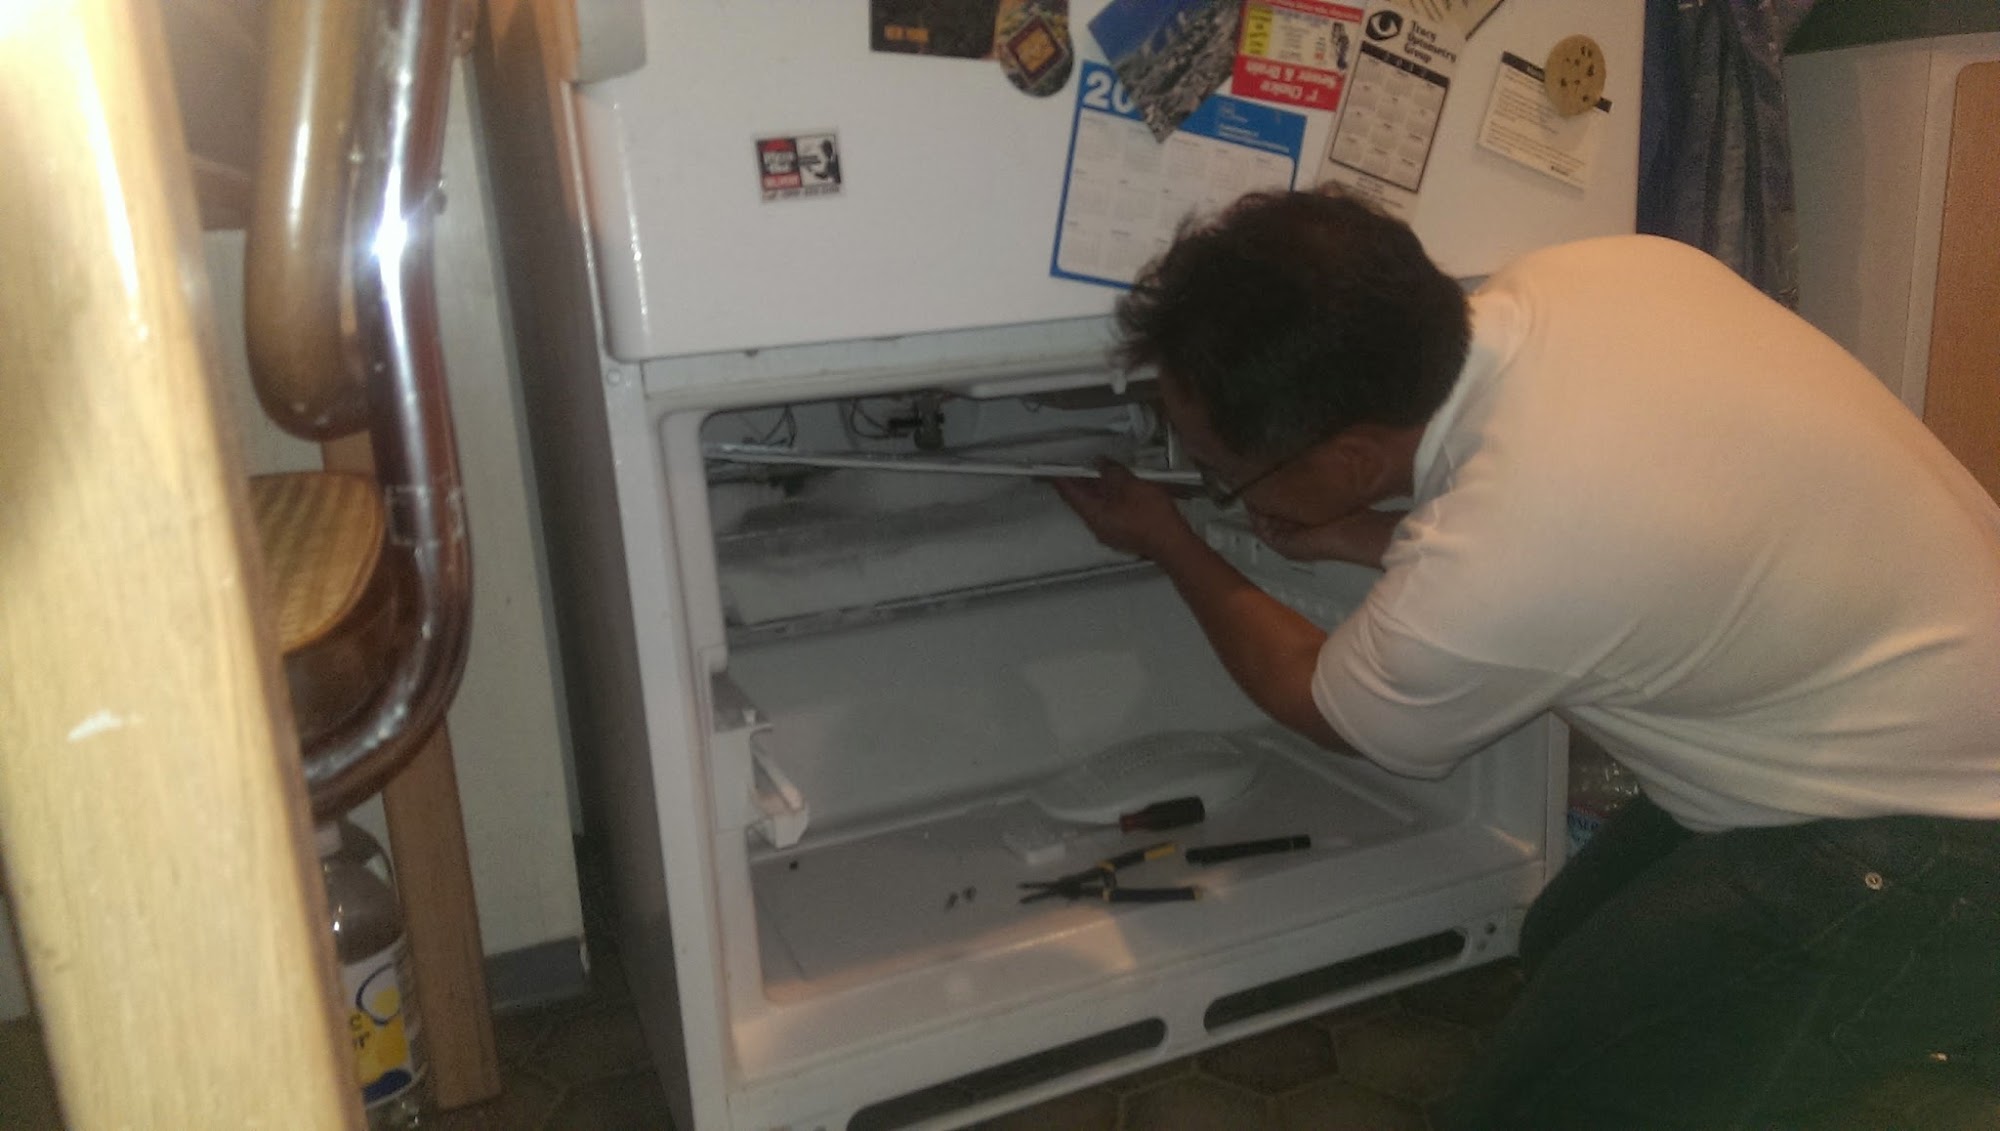 LG Refrigerator Repair by MD Home Services